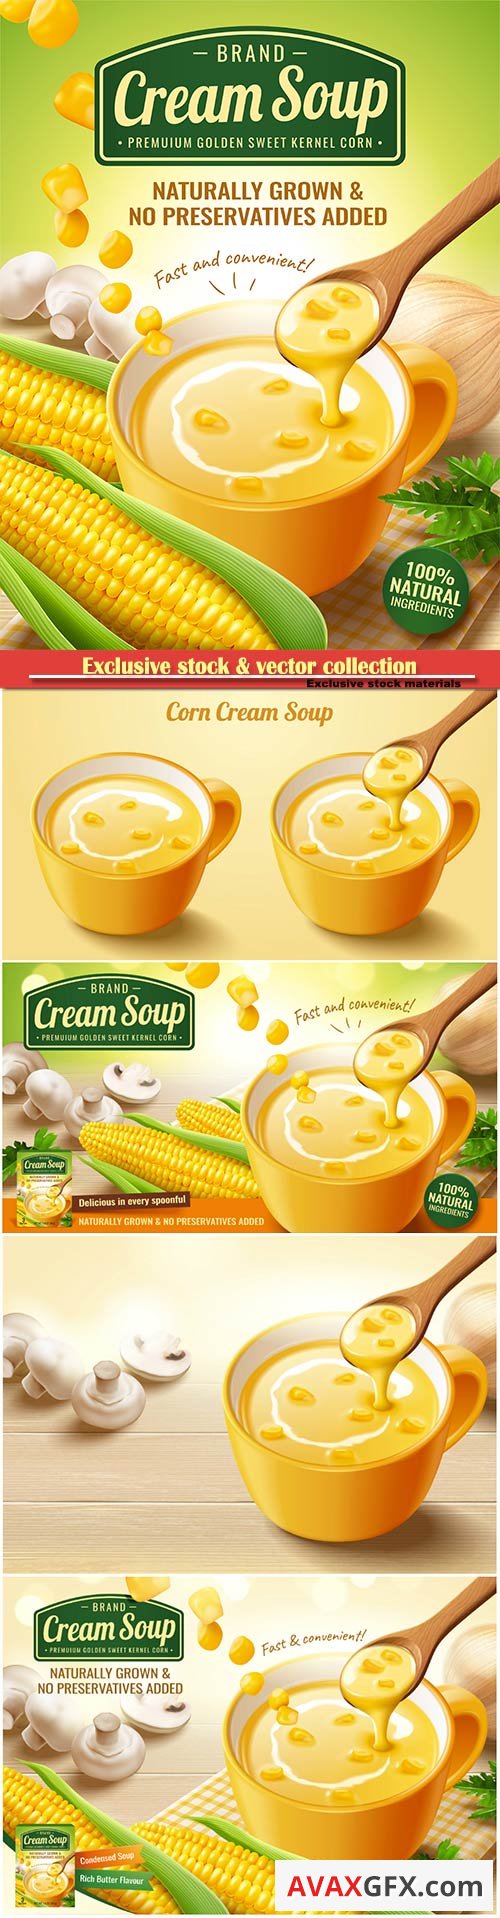 Instant corn cream soup ads with fresh corncob and mushroom in 3d illustration